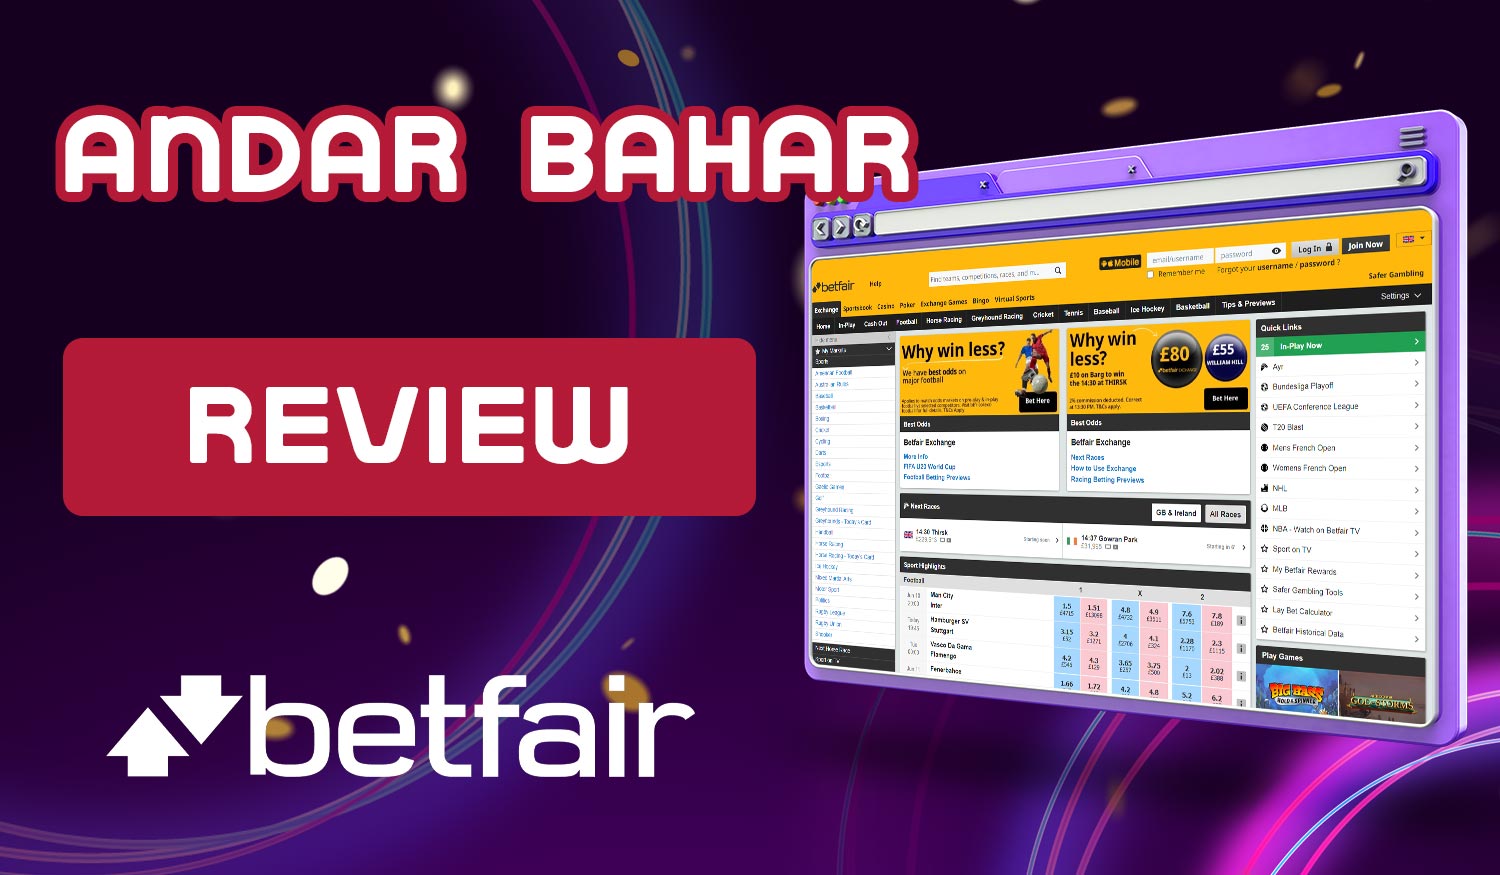 Detailed review of the Betfair India bookmaker on Andar Bahars